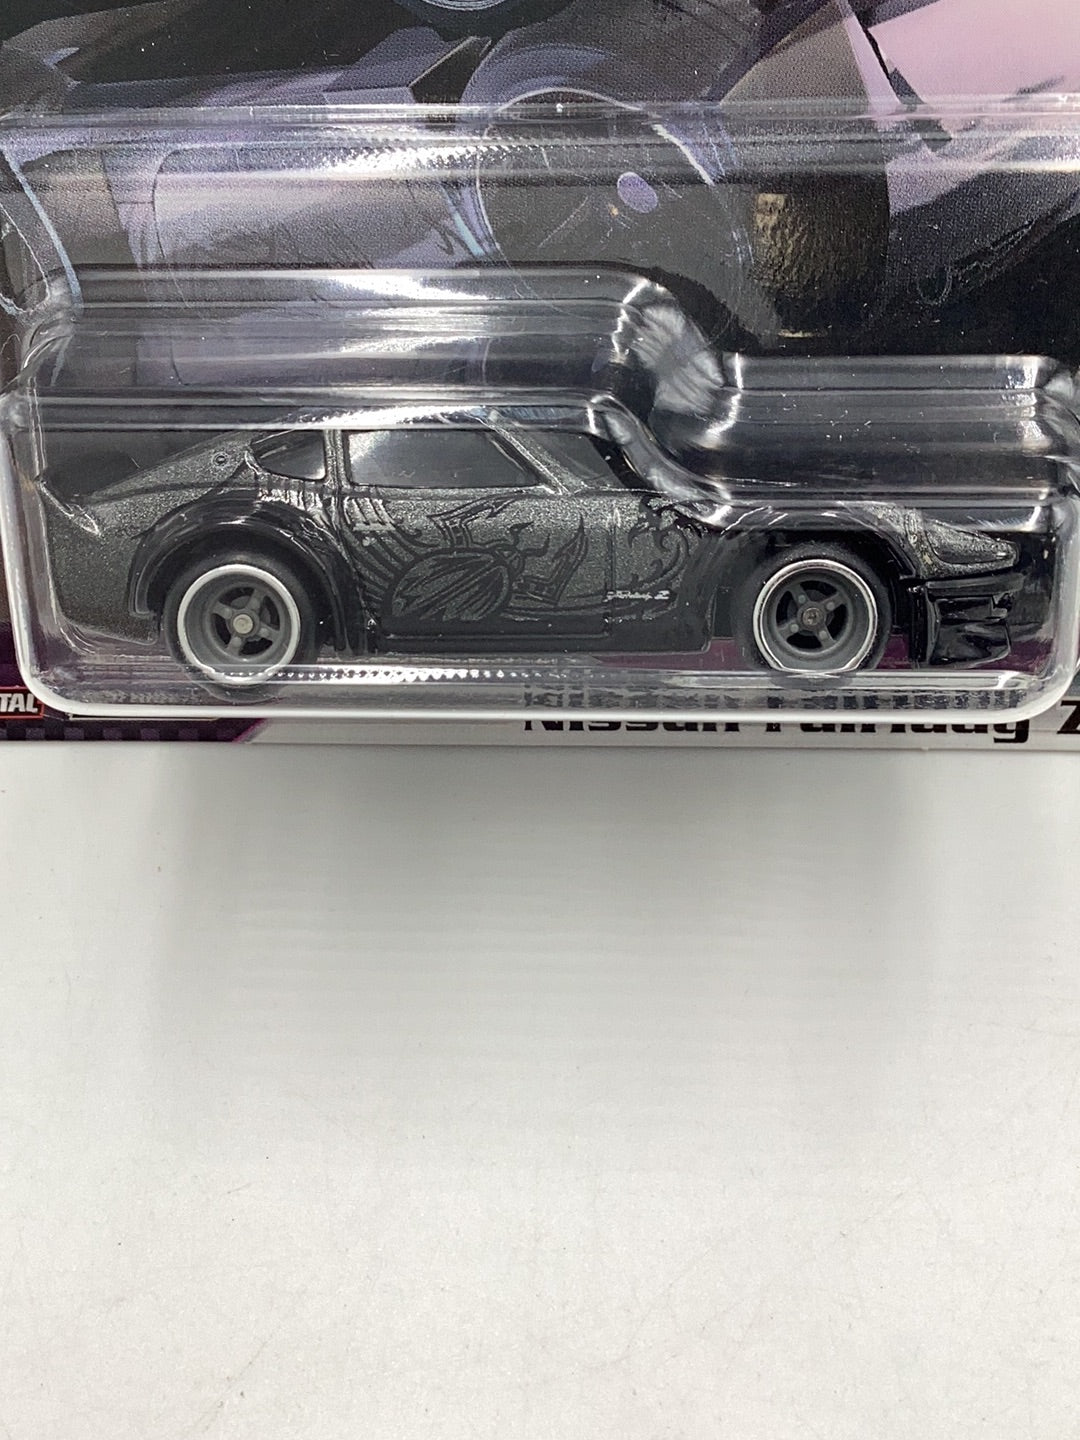 Hot wheels fast and furious Fast Rewind #4 Nissan Fairlady Z 246Q